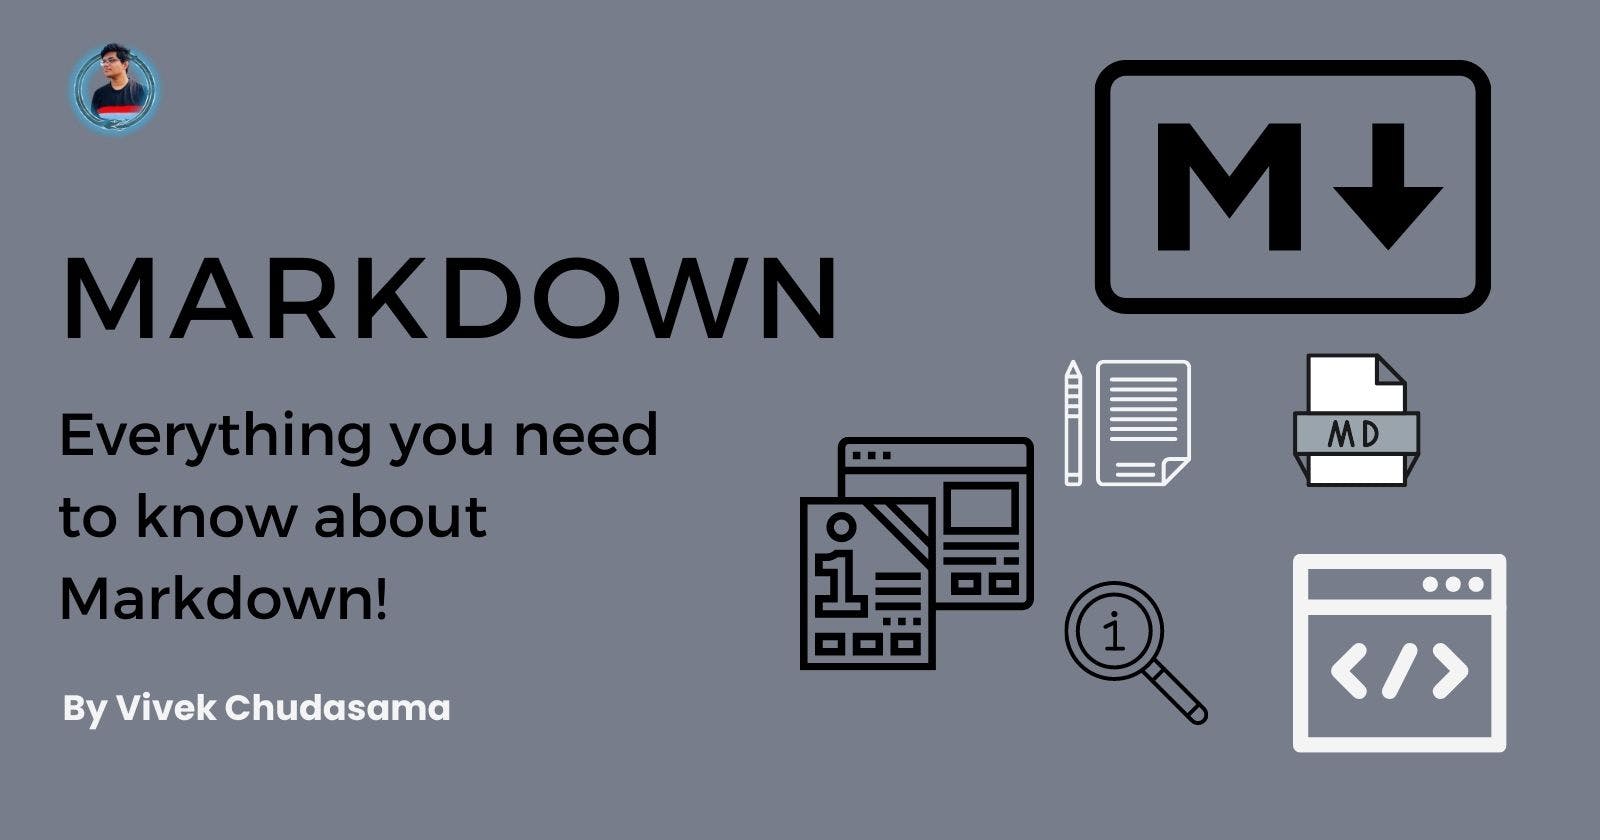 Markdown | Everything you need to know about!